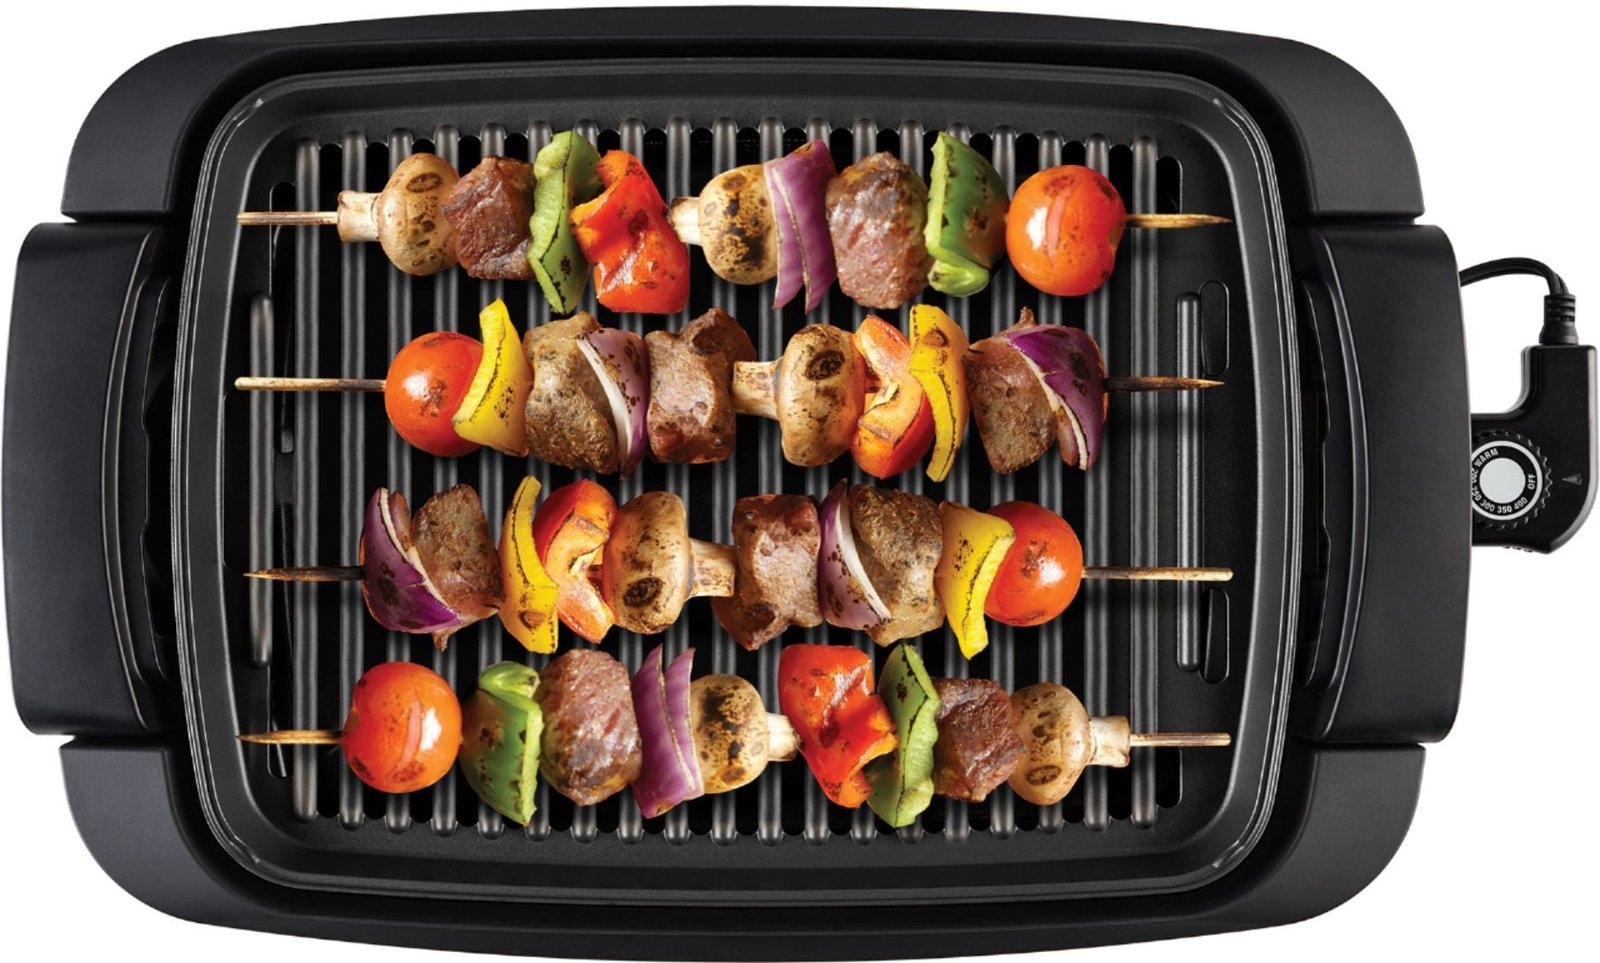 Indoor Barbecue Electric Grill, Indoor Smokeless Grill Stainless